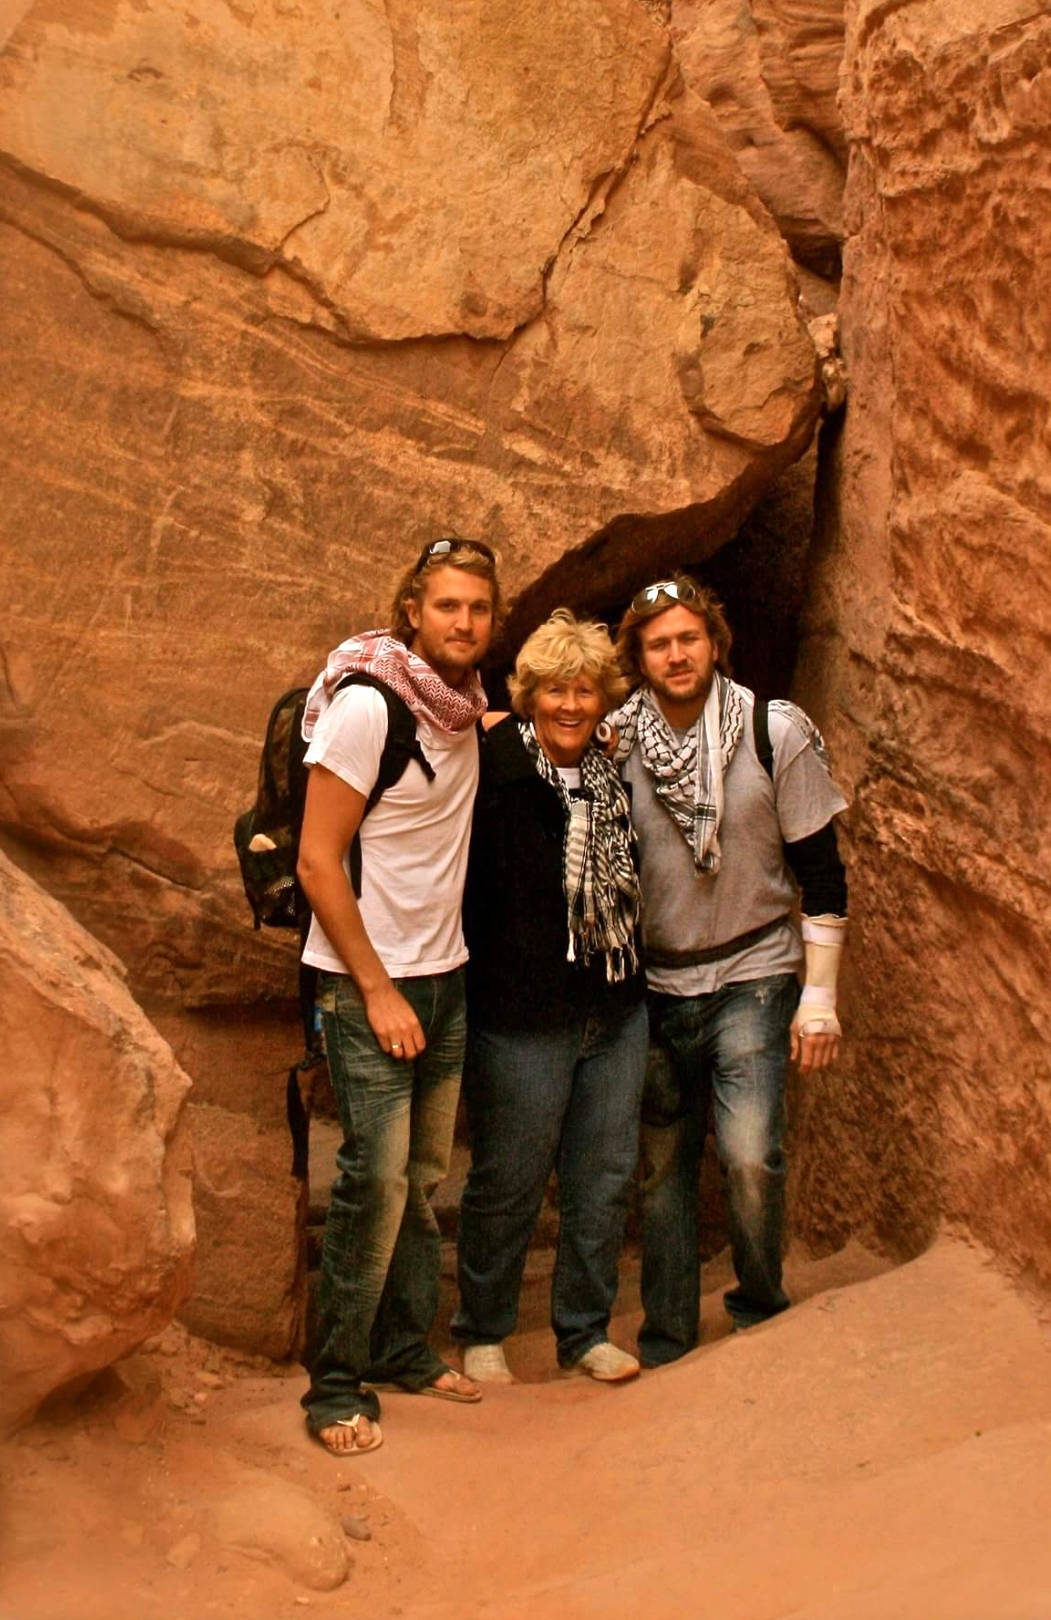 Brothers Erik and Kirk Brown grew up travelling the world together. Here they are pictured with their mom, Dorothy, in Petra, Jordan. Photo courtesy of Kirk Brown